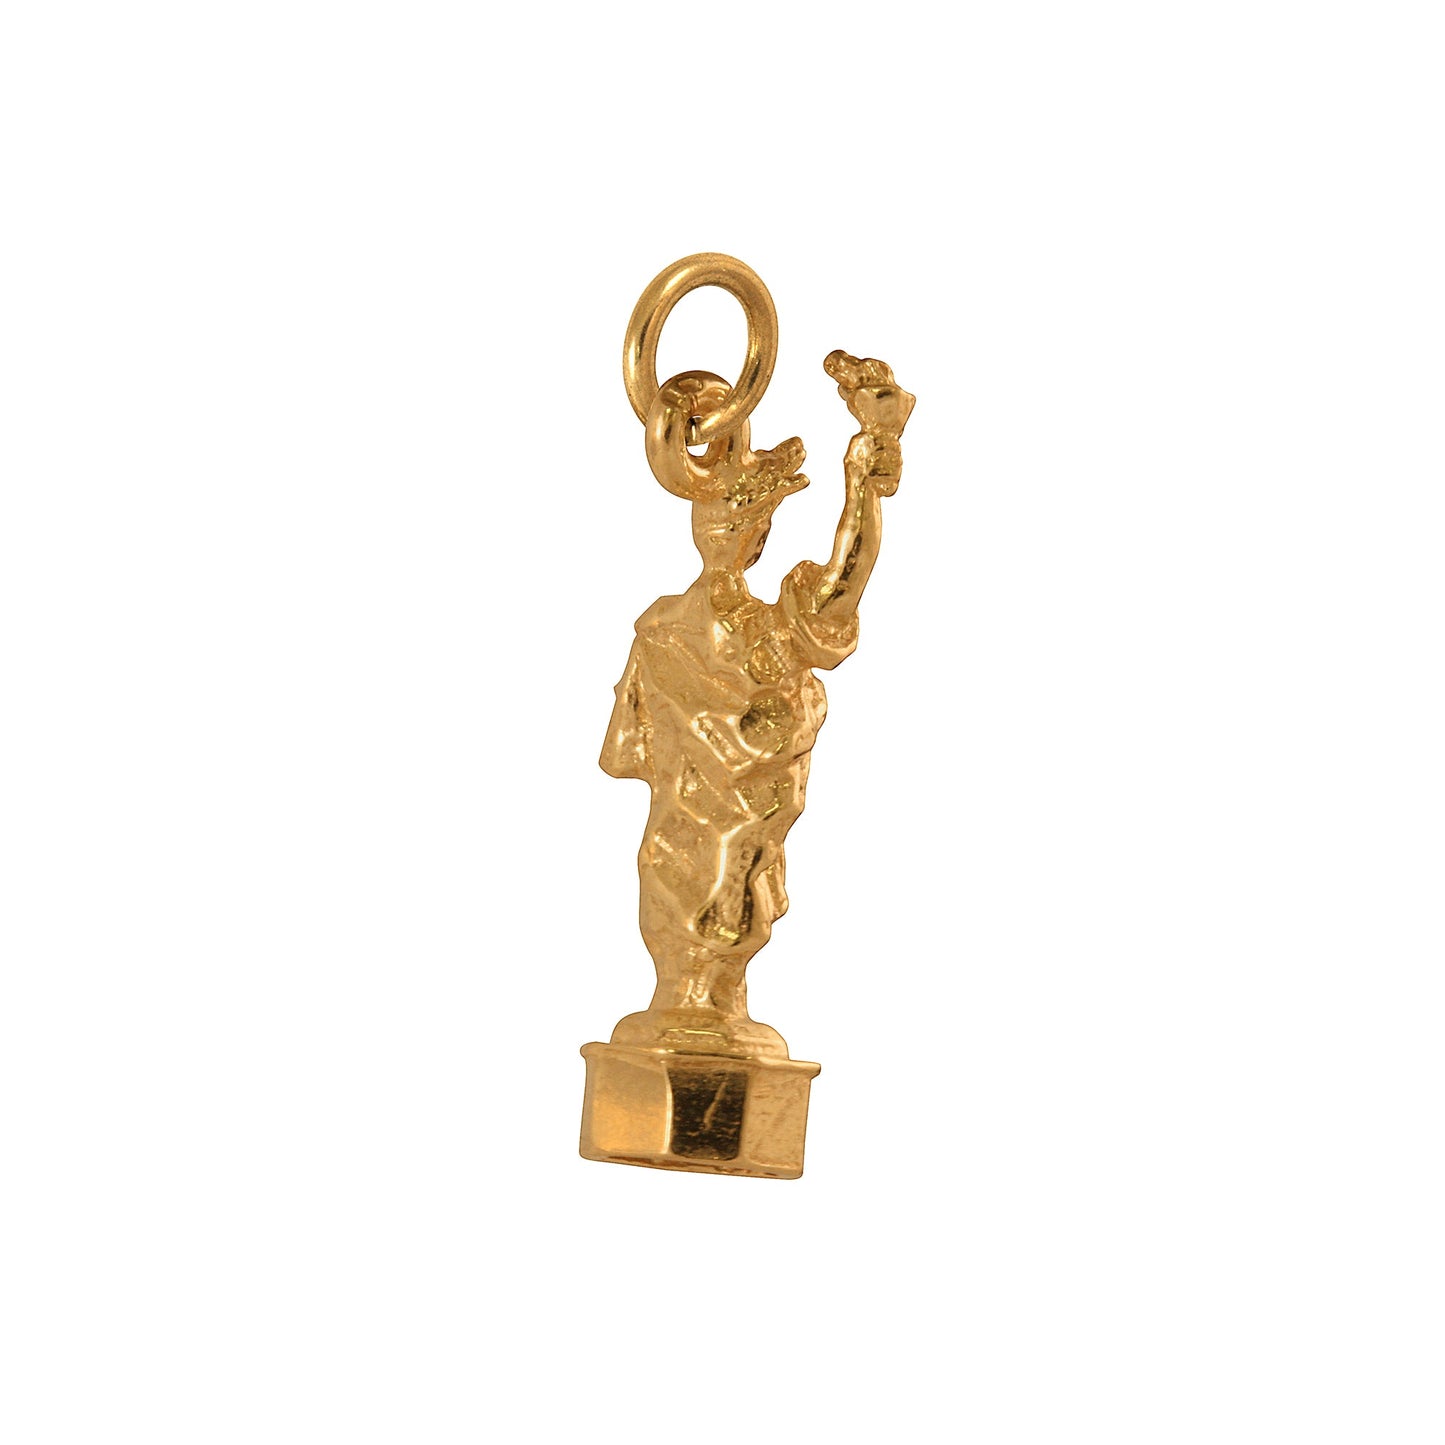 9ct Gold Statue of Liberty Charm